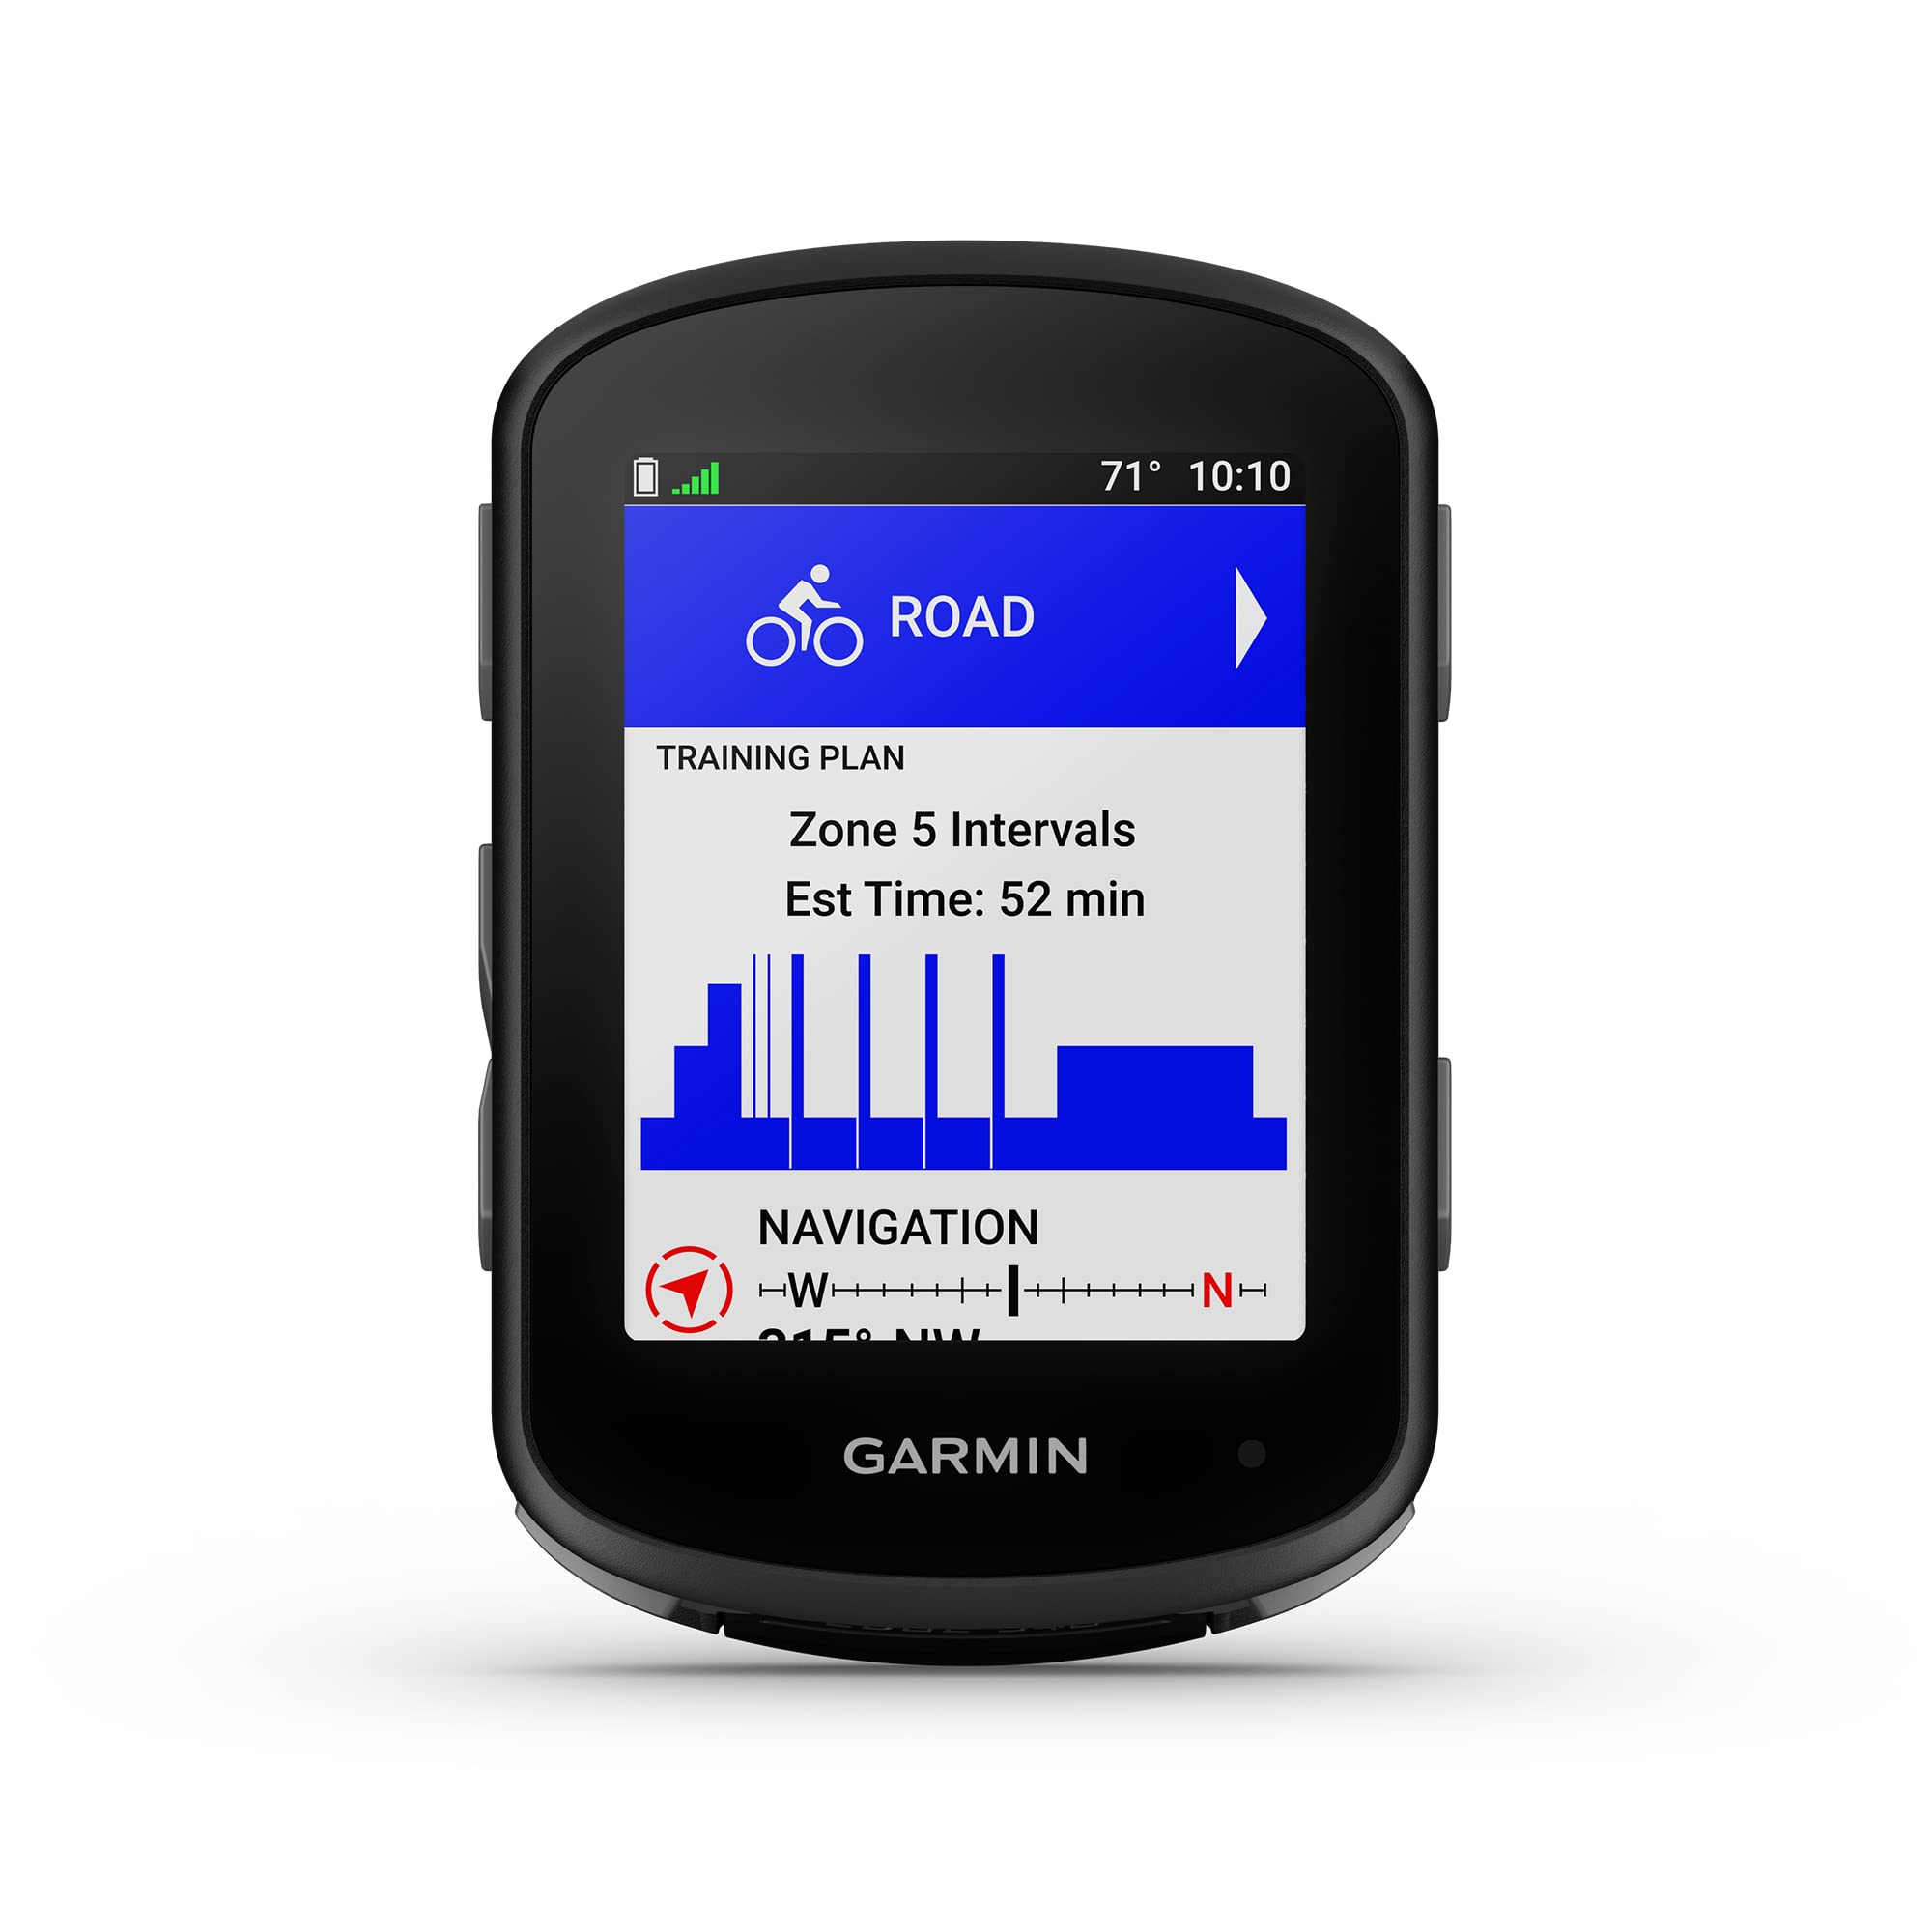 Garmin Edge 540 Bundle,  Compact GPS Cycling Computer with Button Controls, Targeted Adaptive Coaching and More – Bundle Includes Speed Sensor, Cadence Sensor and HRM-Dual